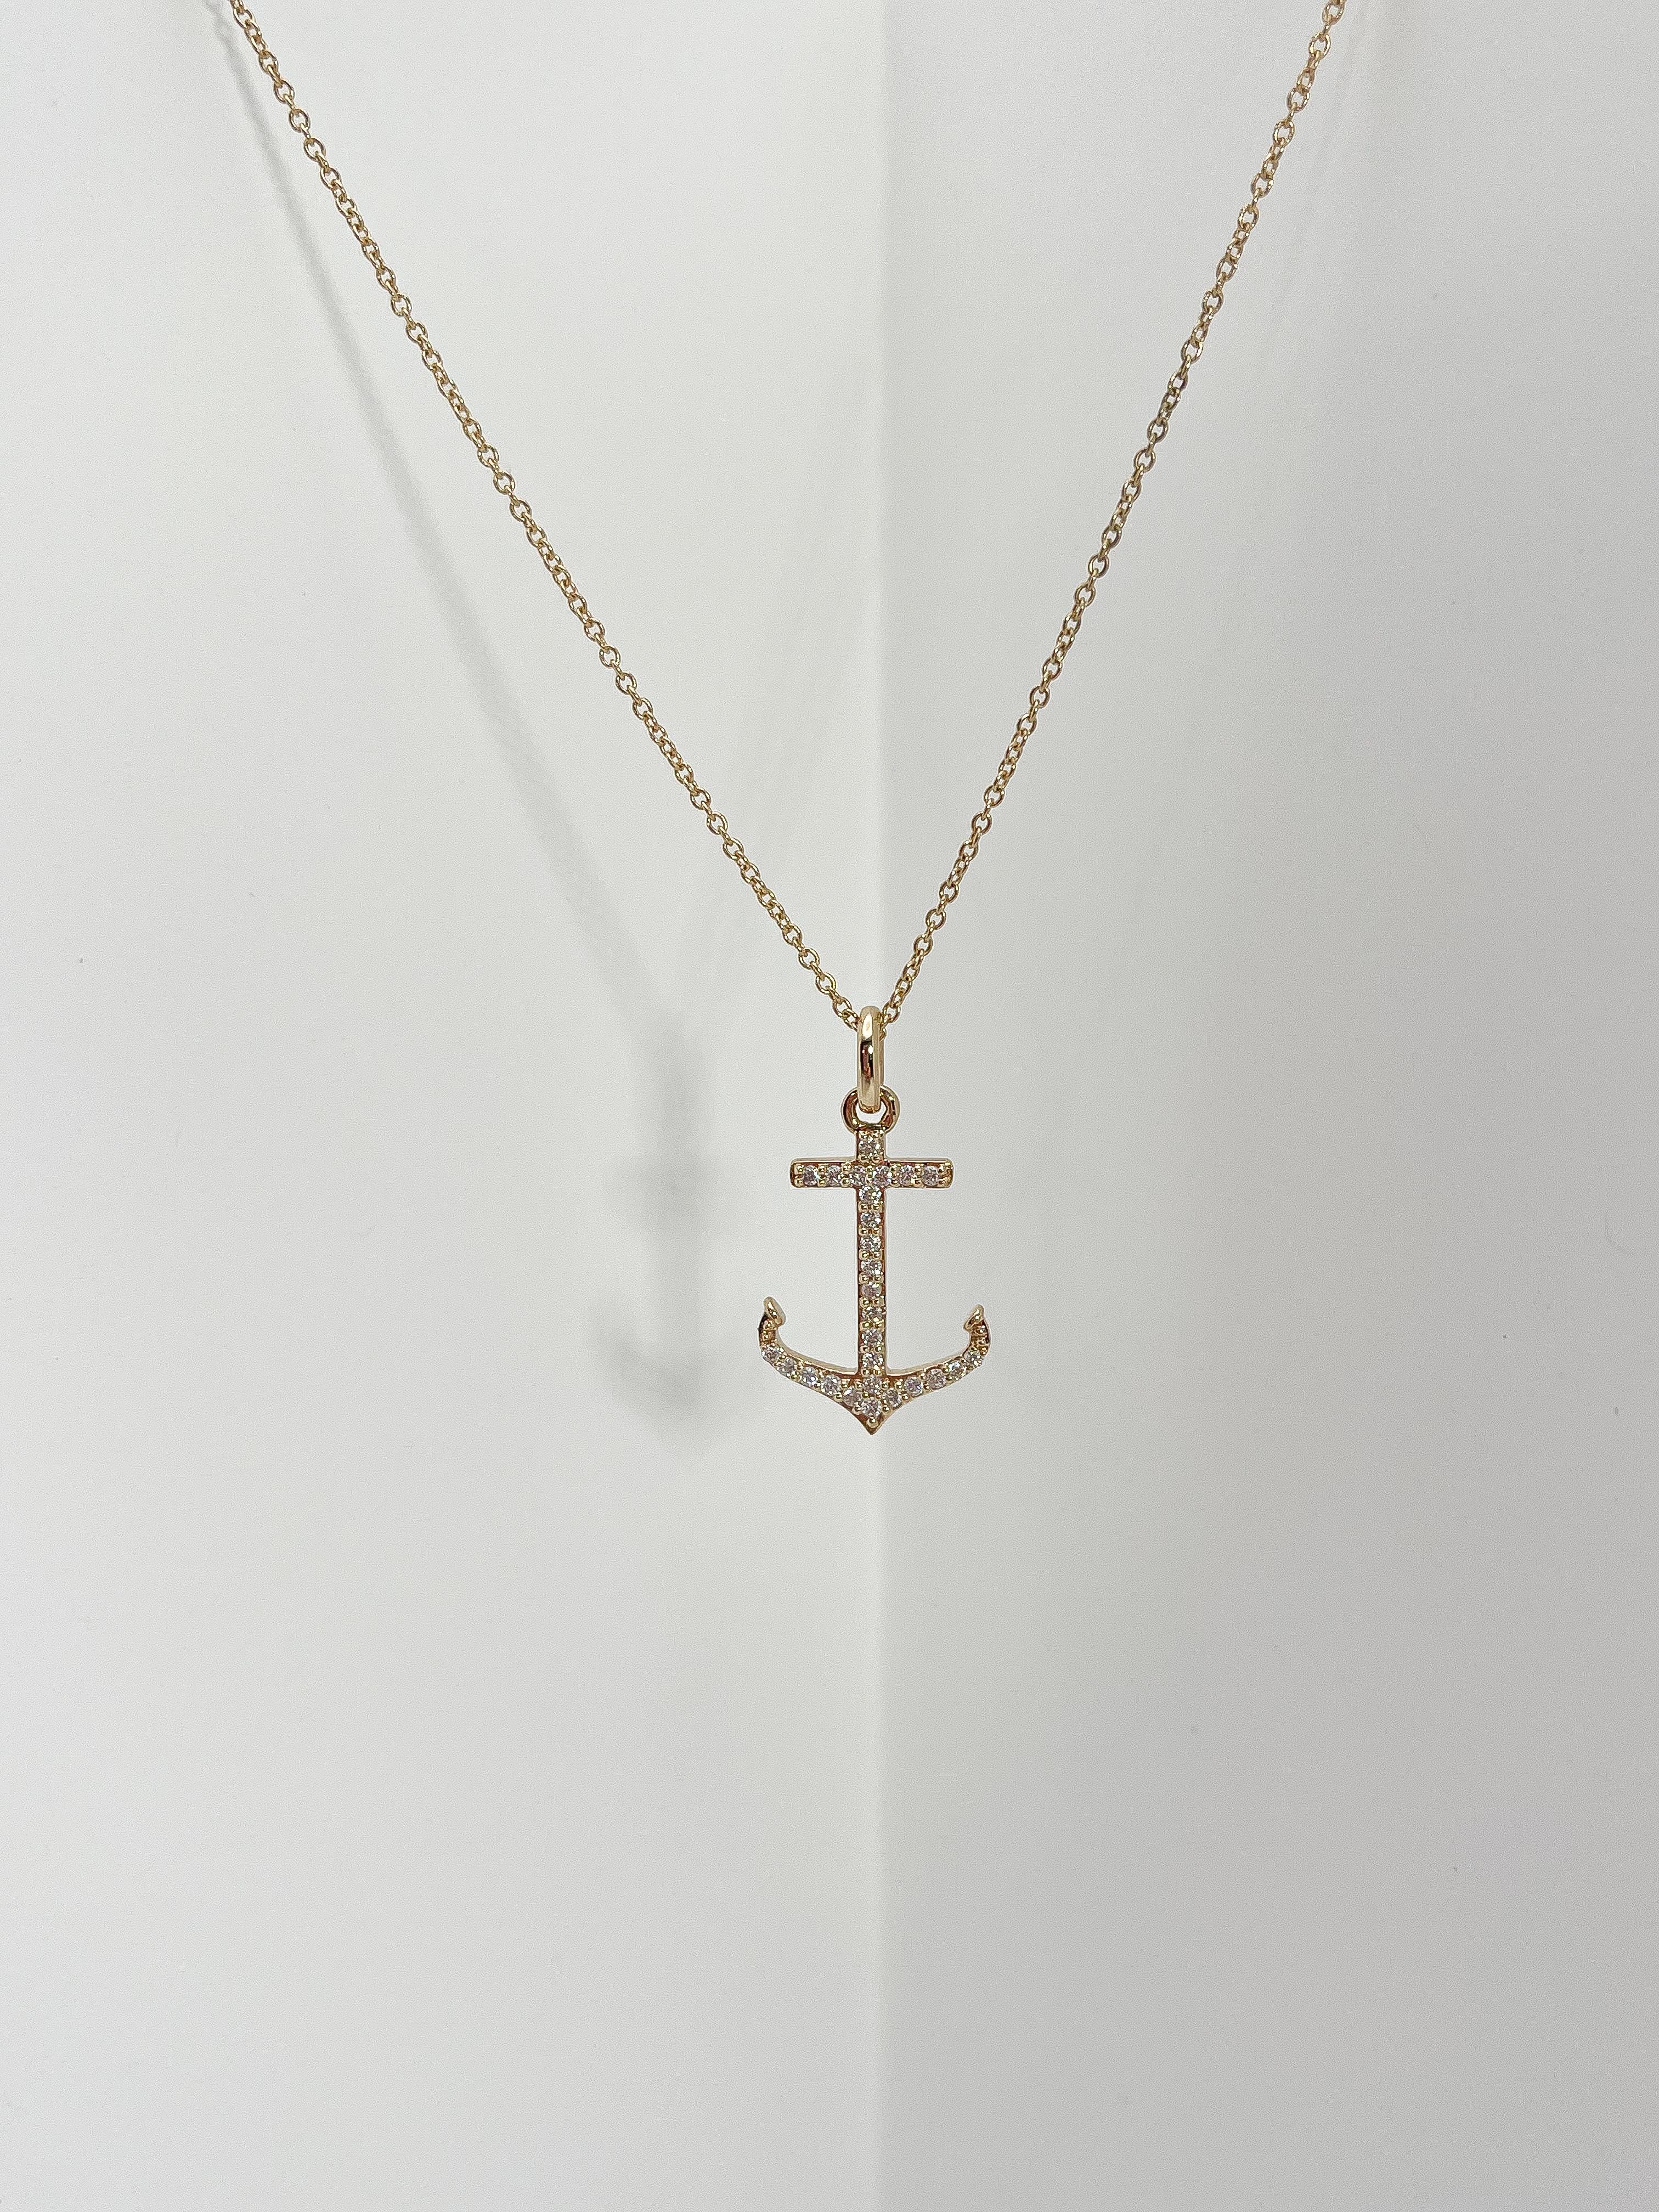 14k yellow gold .25 CTW diamond anchor pendant necklace. All diamonds in the pendant are round, the pendant measures 23mm x 14.5mm, comes on a 16-inch diamond cut cable chain with an extension to 17 inches, has a lobster clasp to open and close, and